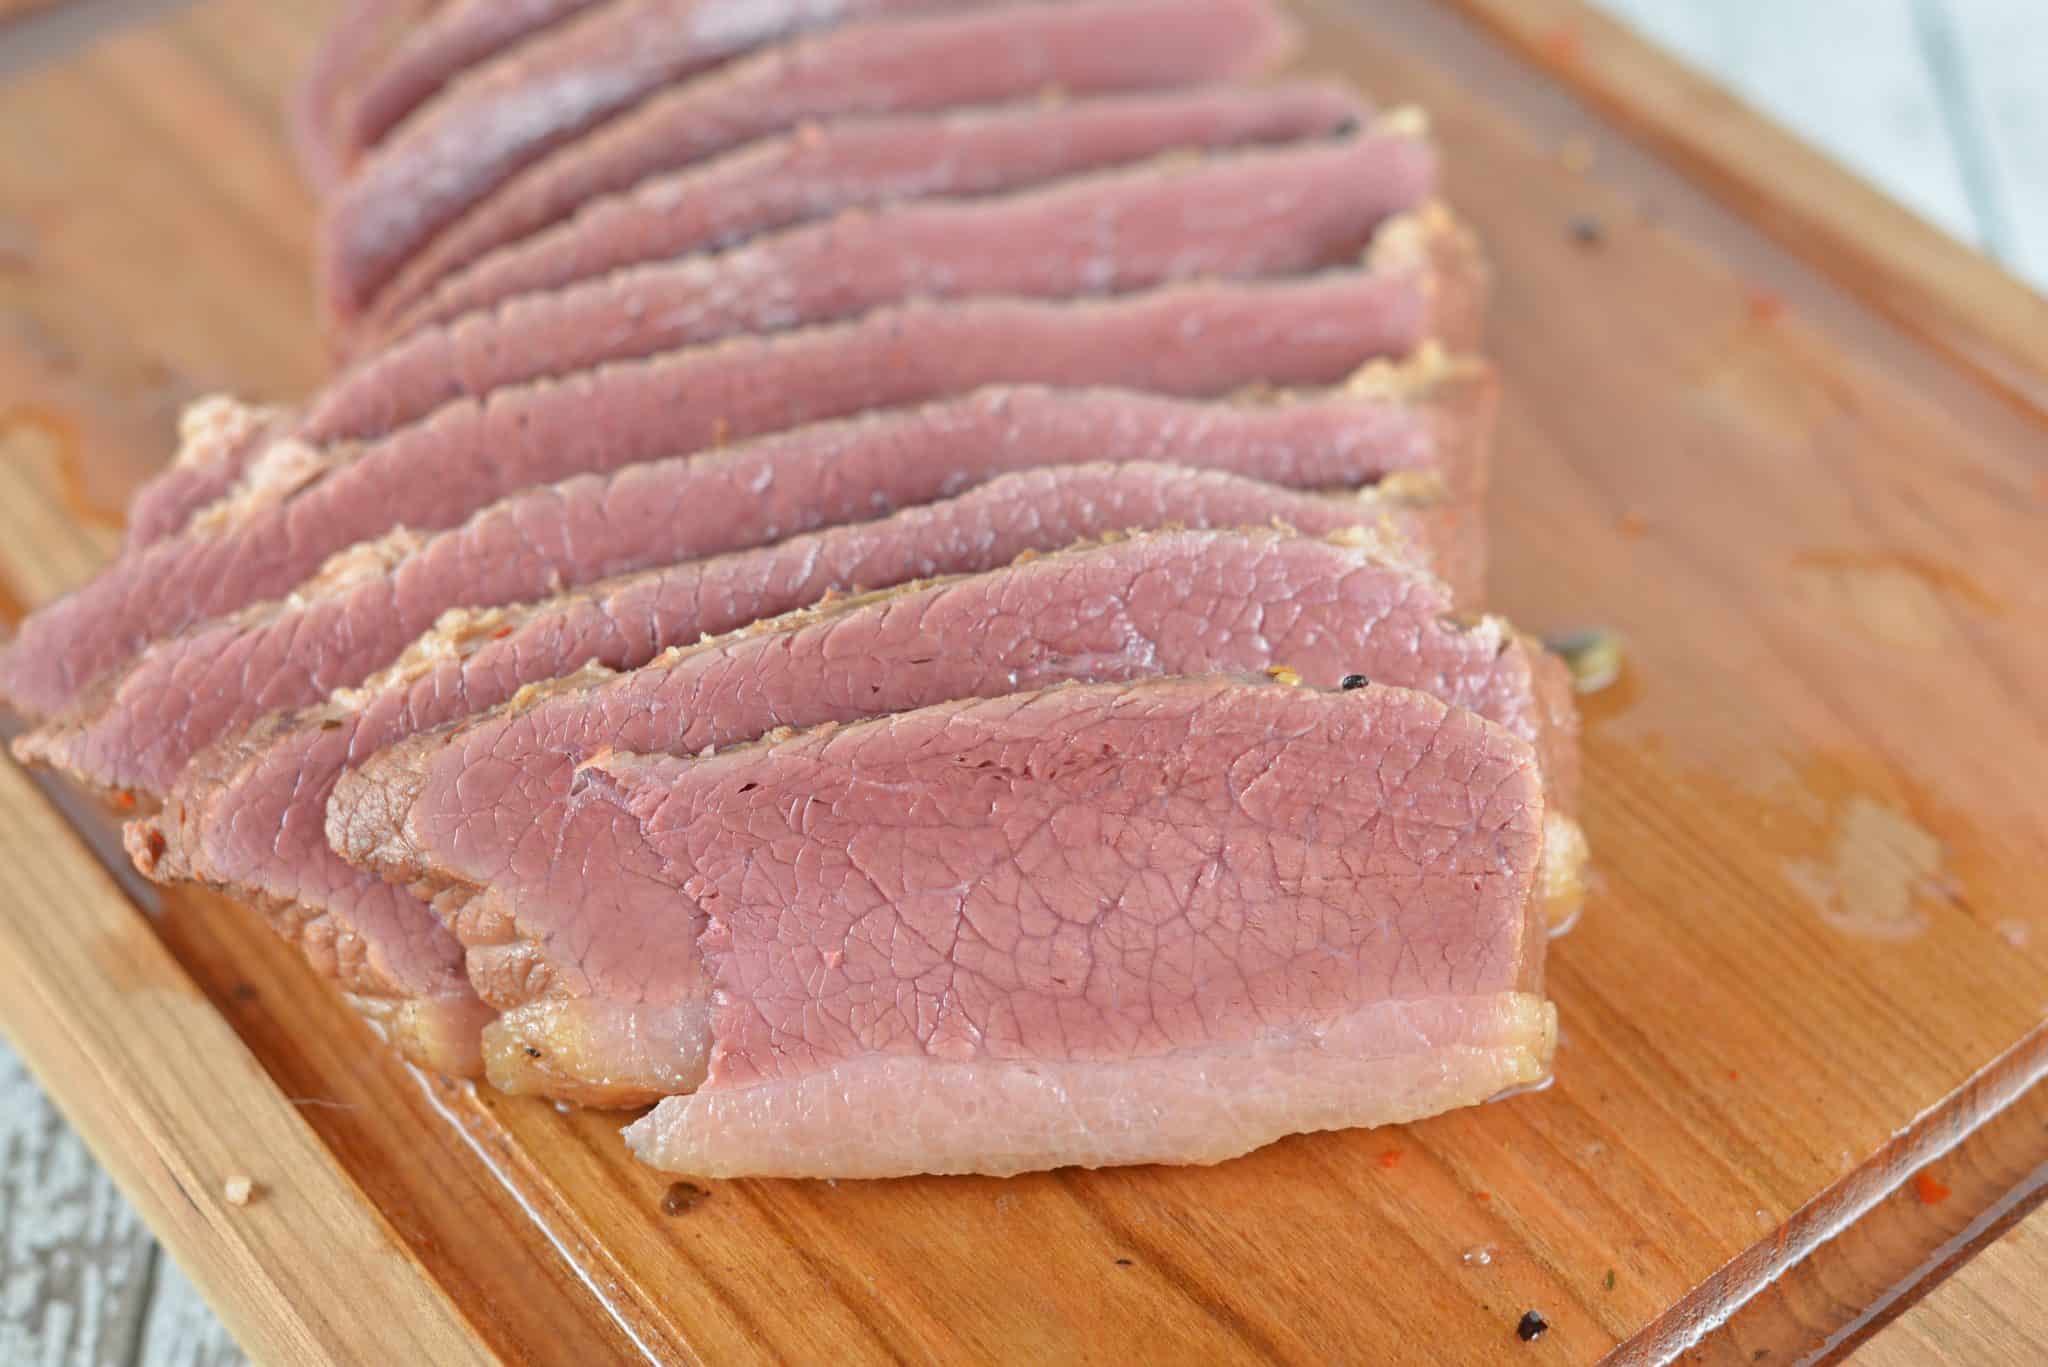 Homemade Corned Beef is simple to make, but takes about a week. The intense flavors and beautiful pink hue are worth the time and wait!